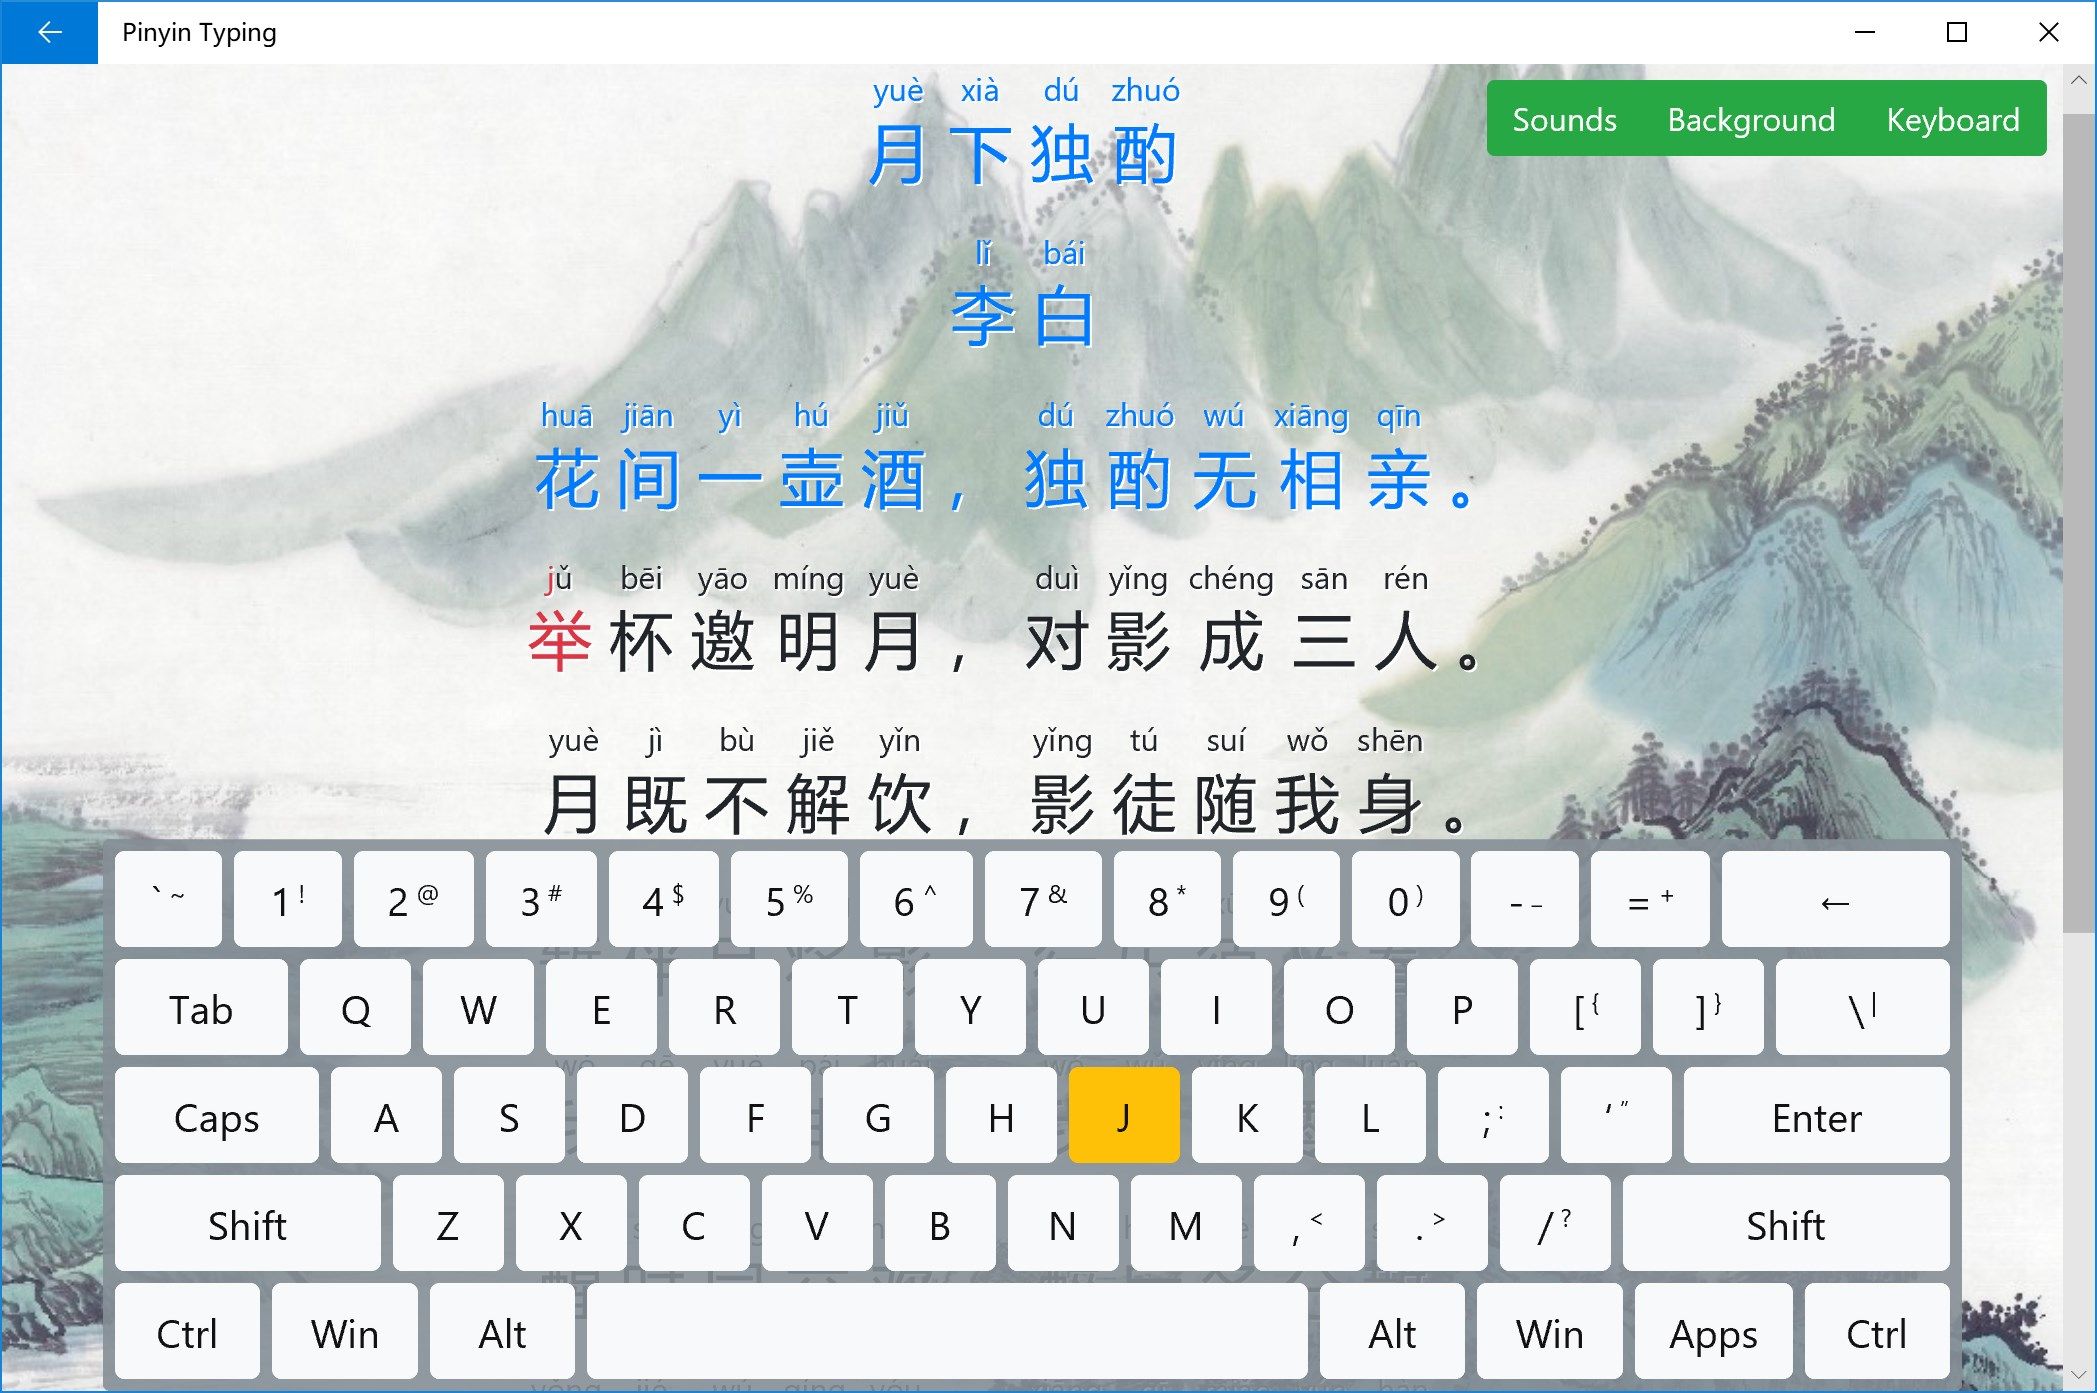 Typing pinyin for ancient Chinese poems